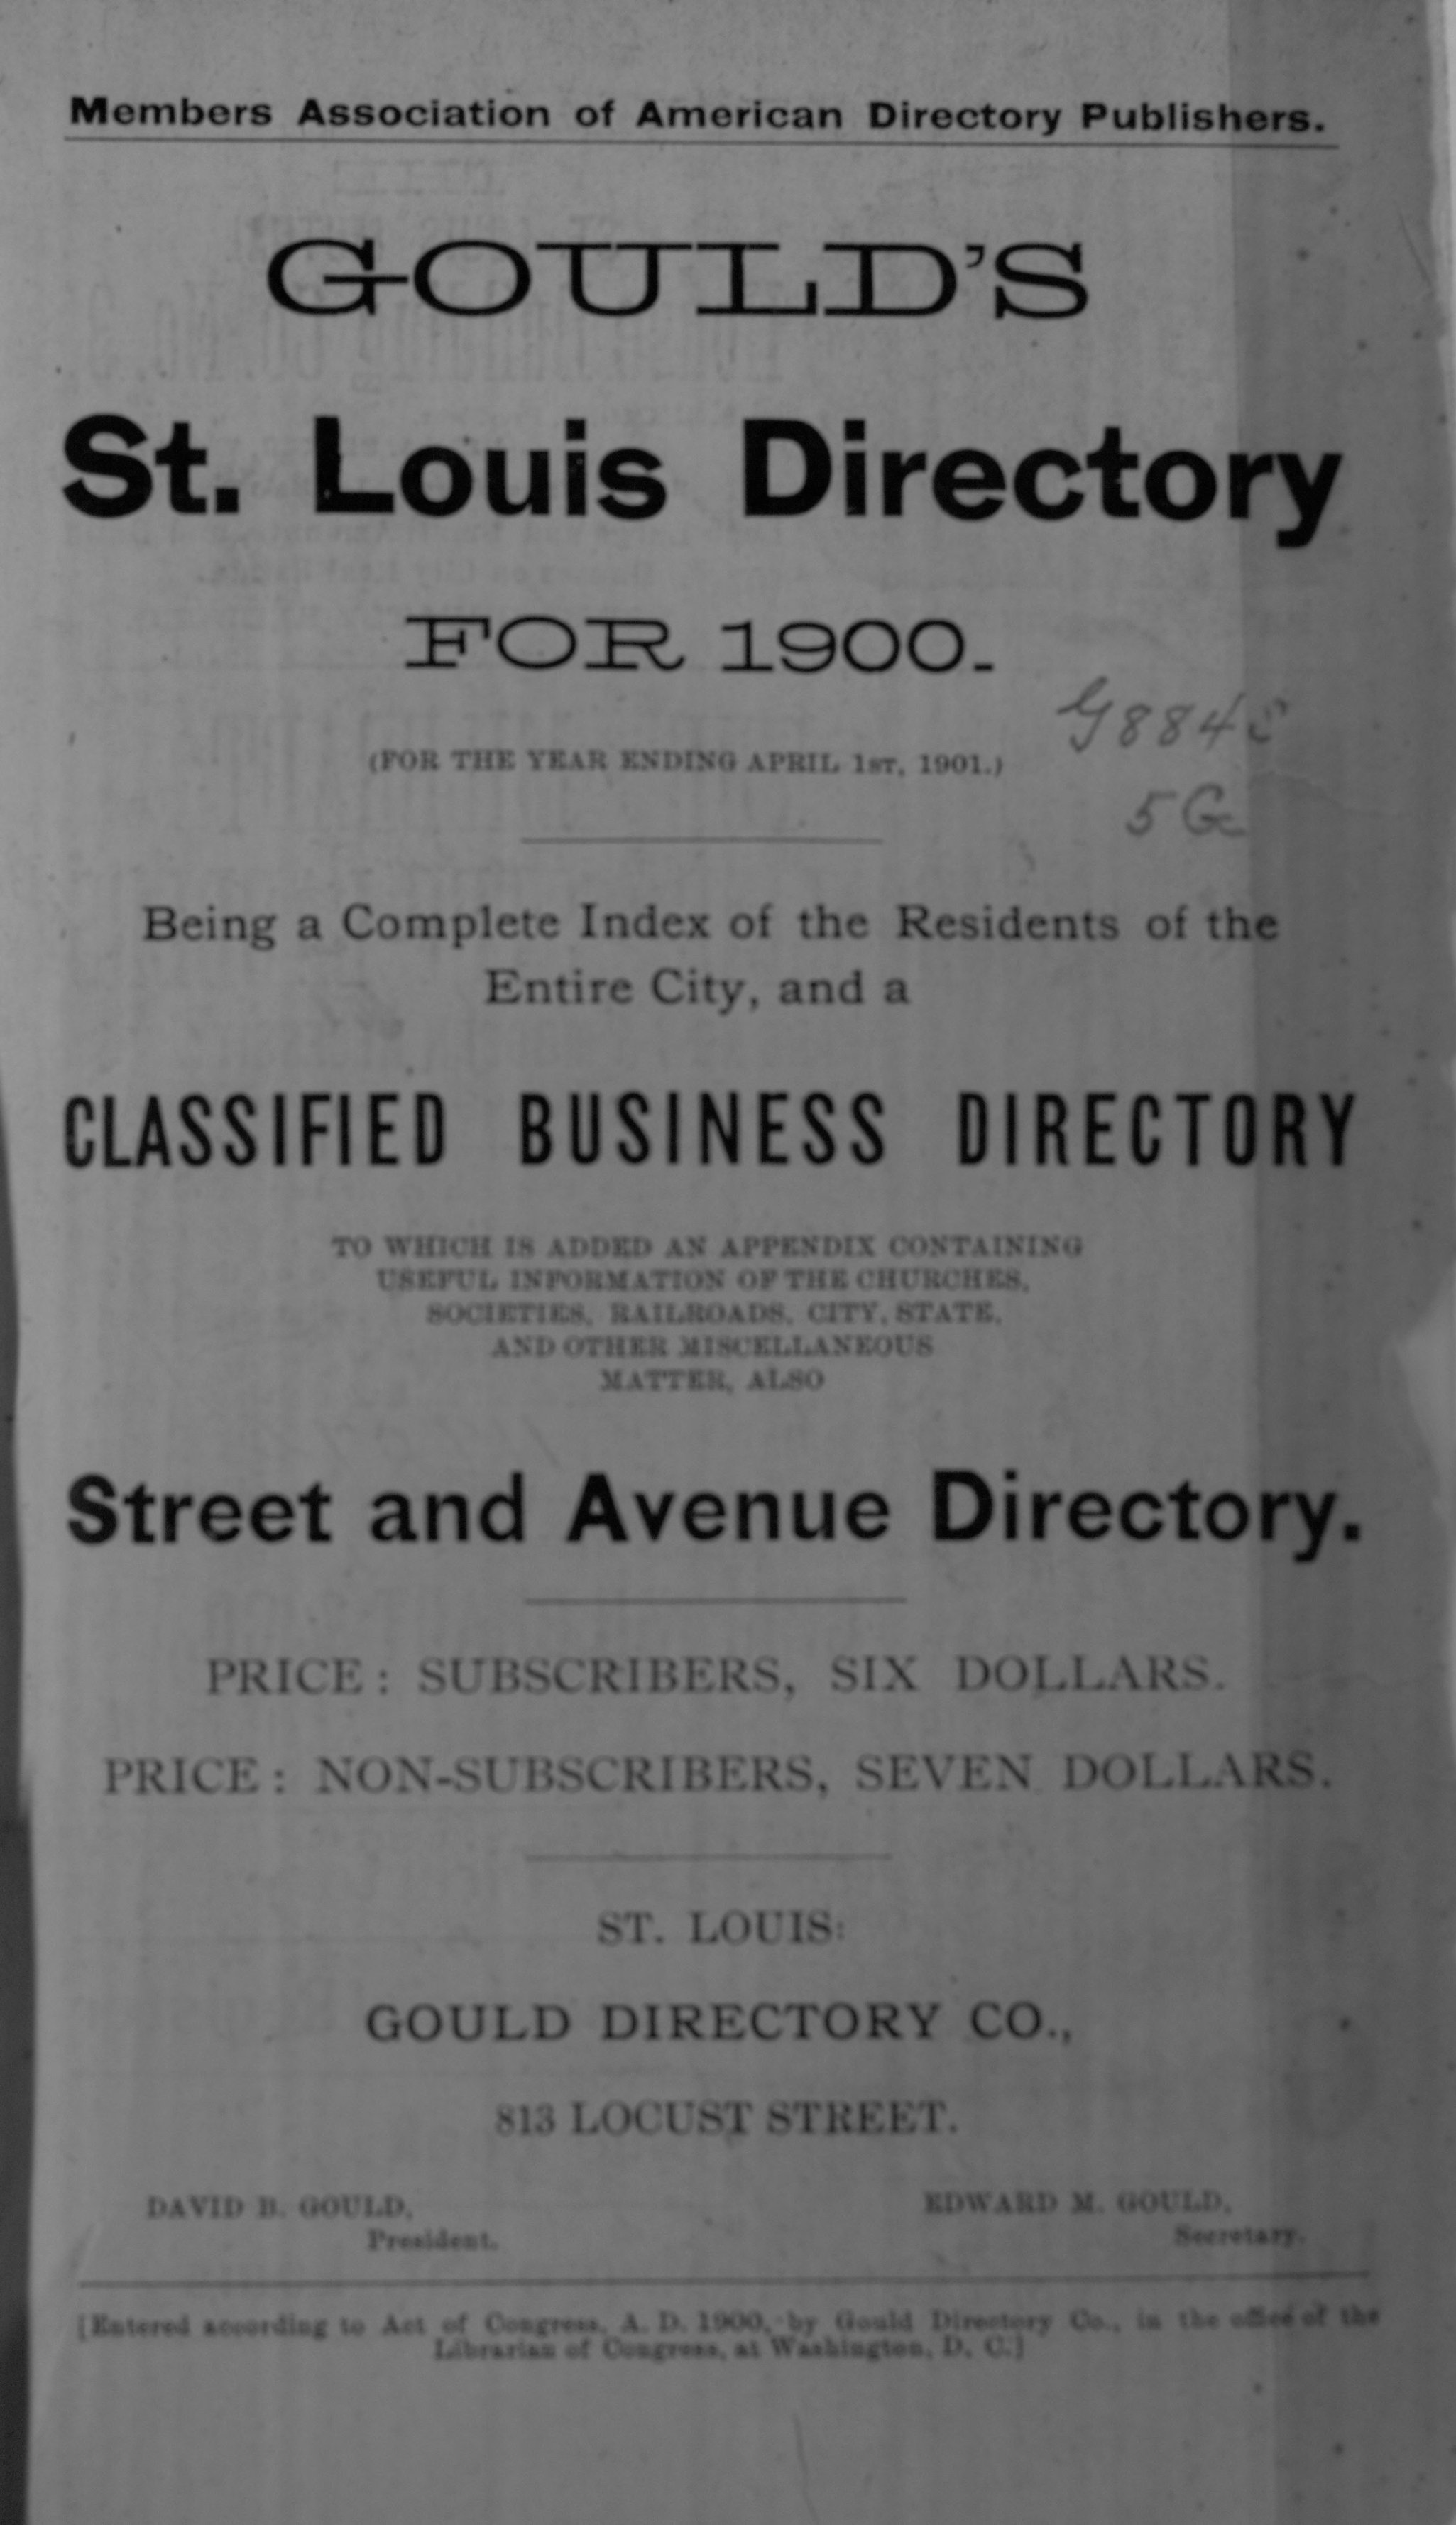 Gould's St. Louis Directory for 1900 (For the Year Ending April 1st, 1901)